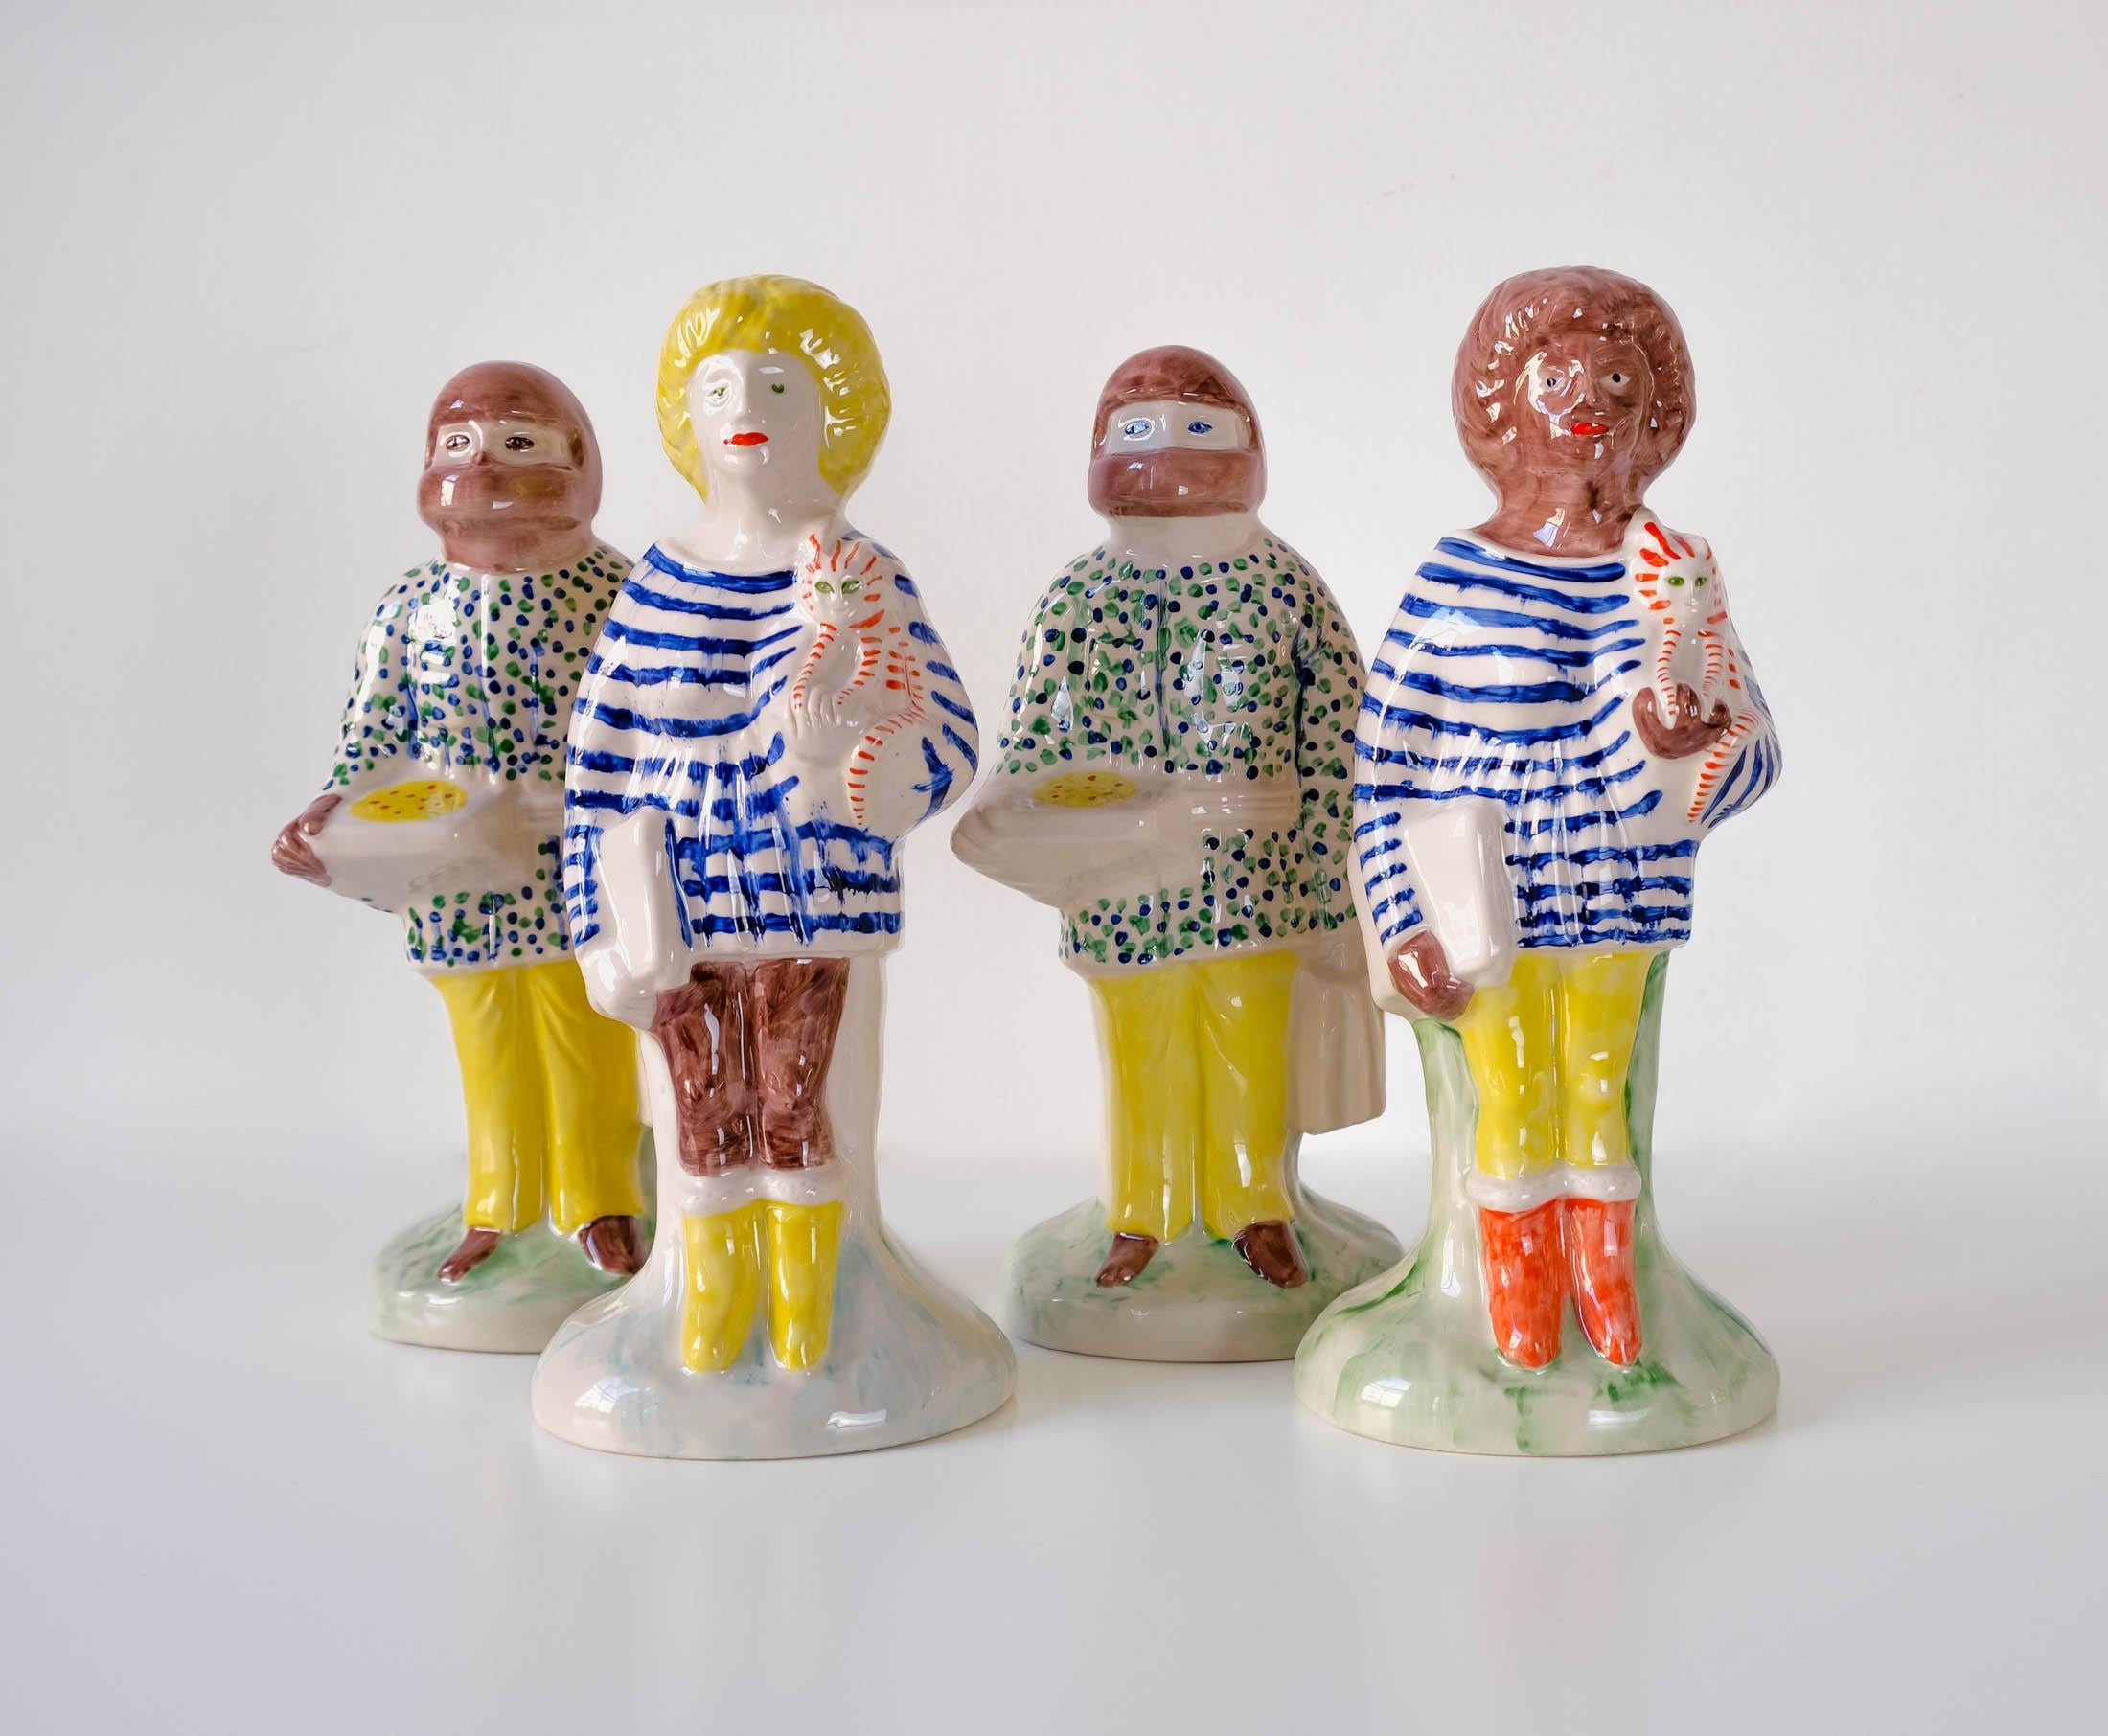 For sale the complete set of Grayson Perry's glazed ceramic hand painted 